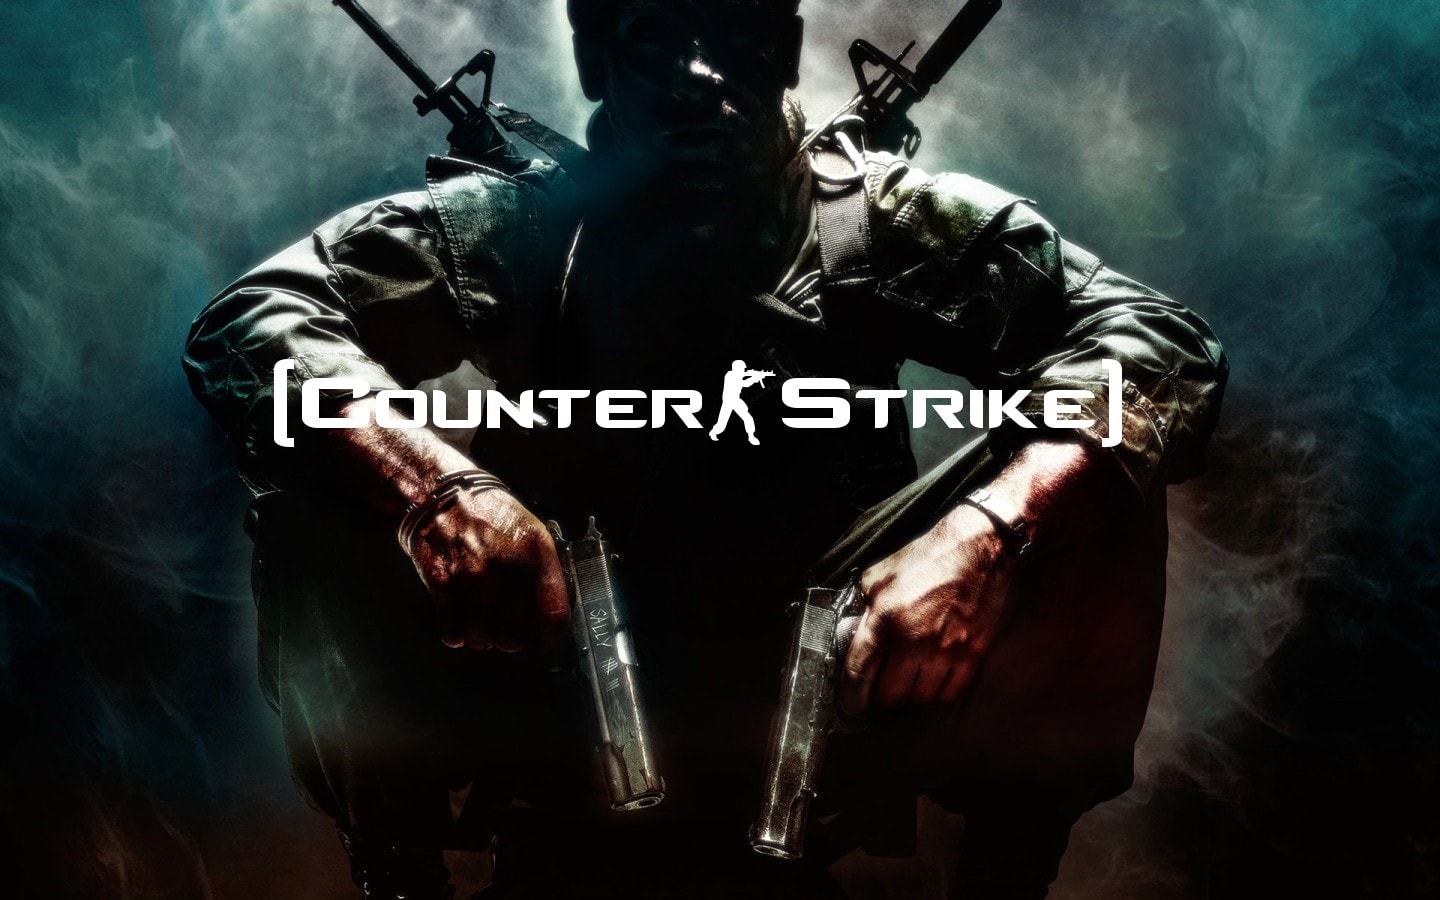 counterstrike wallpaper,action adventure game,movie,pc game,action film,shooter game